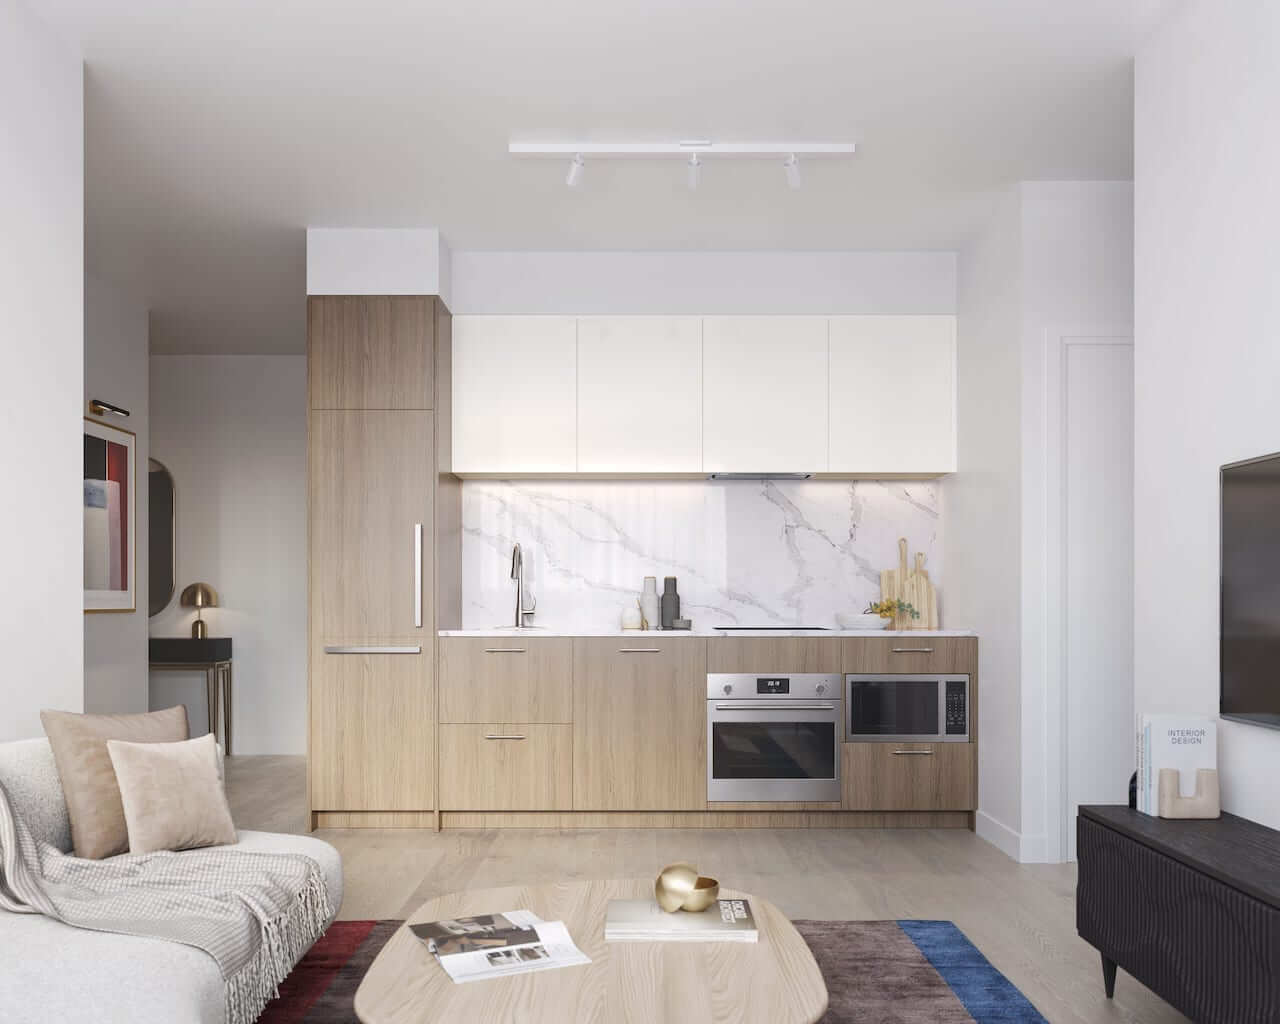 Rendering of Olive Residences suite kitchen close-up interior